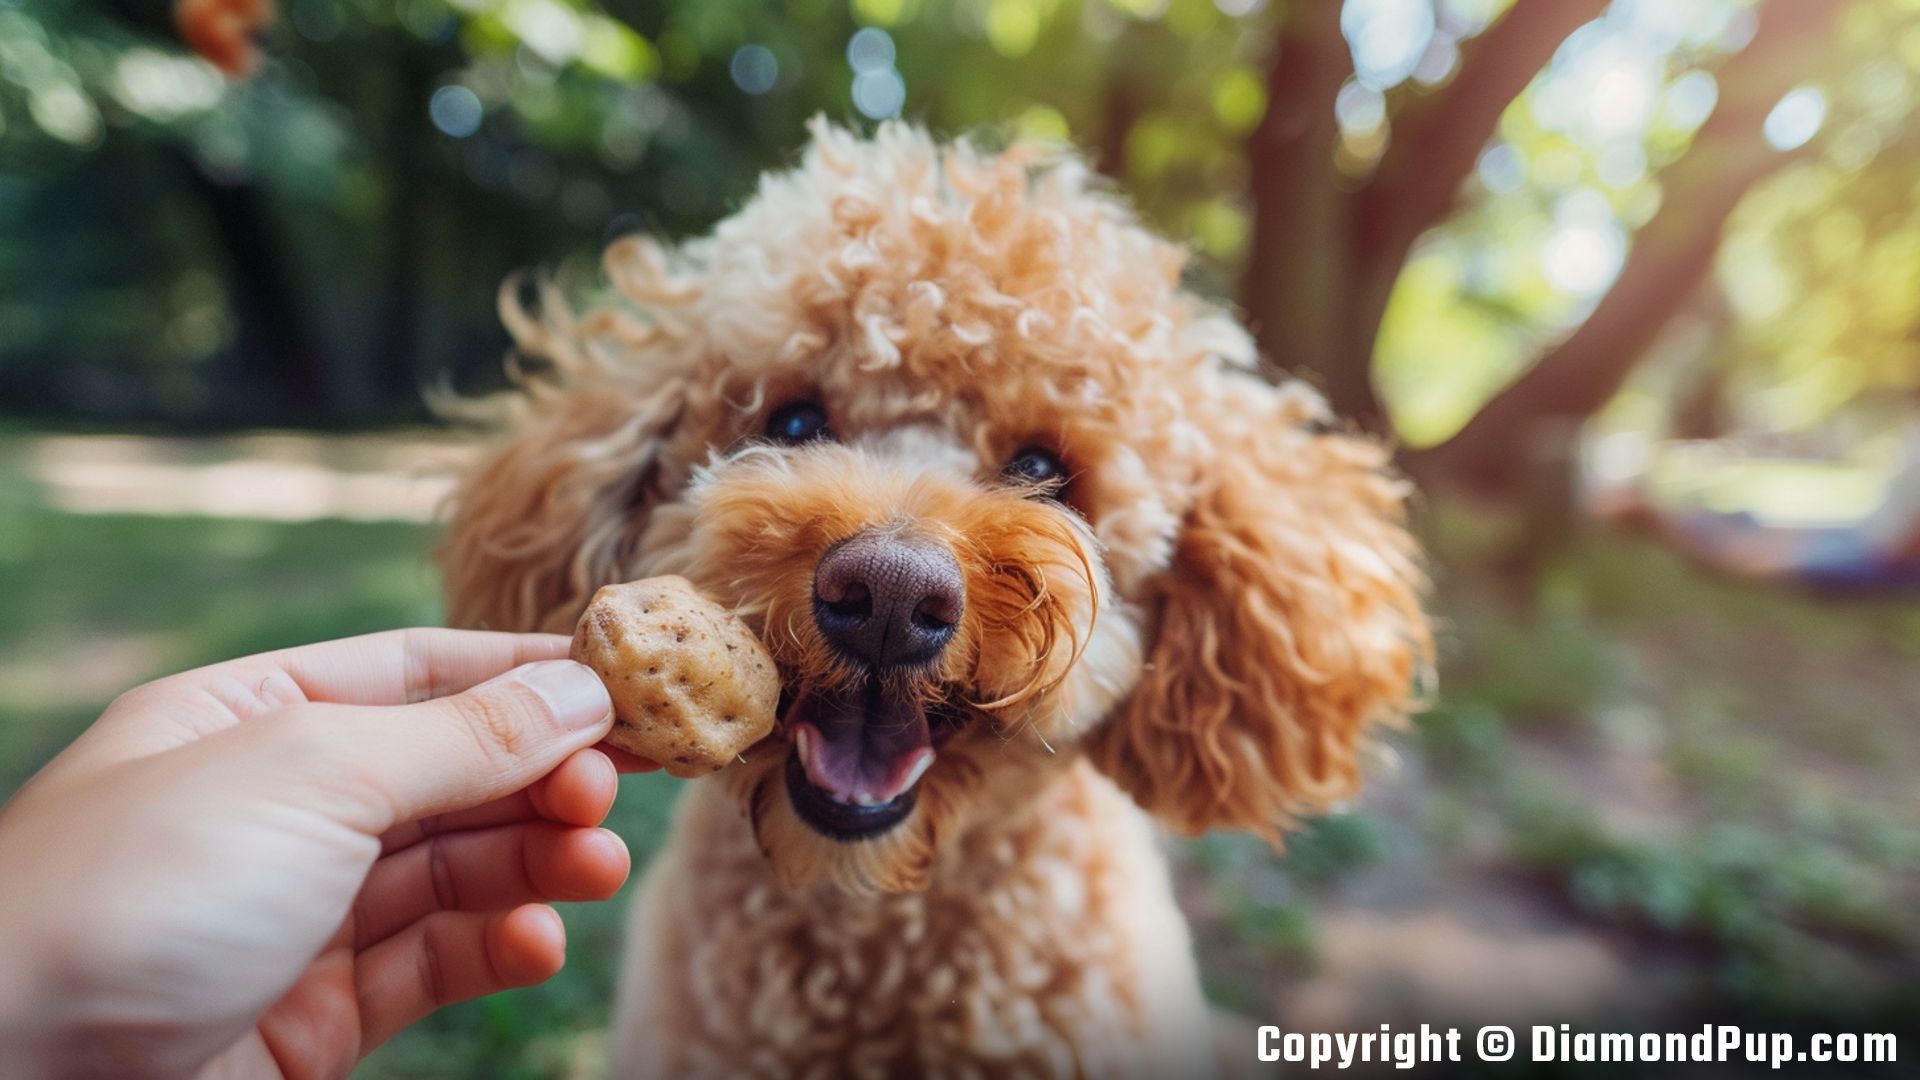 Photograph of a Playful Poodle Snacking on Potato